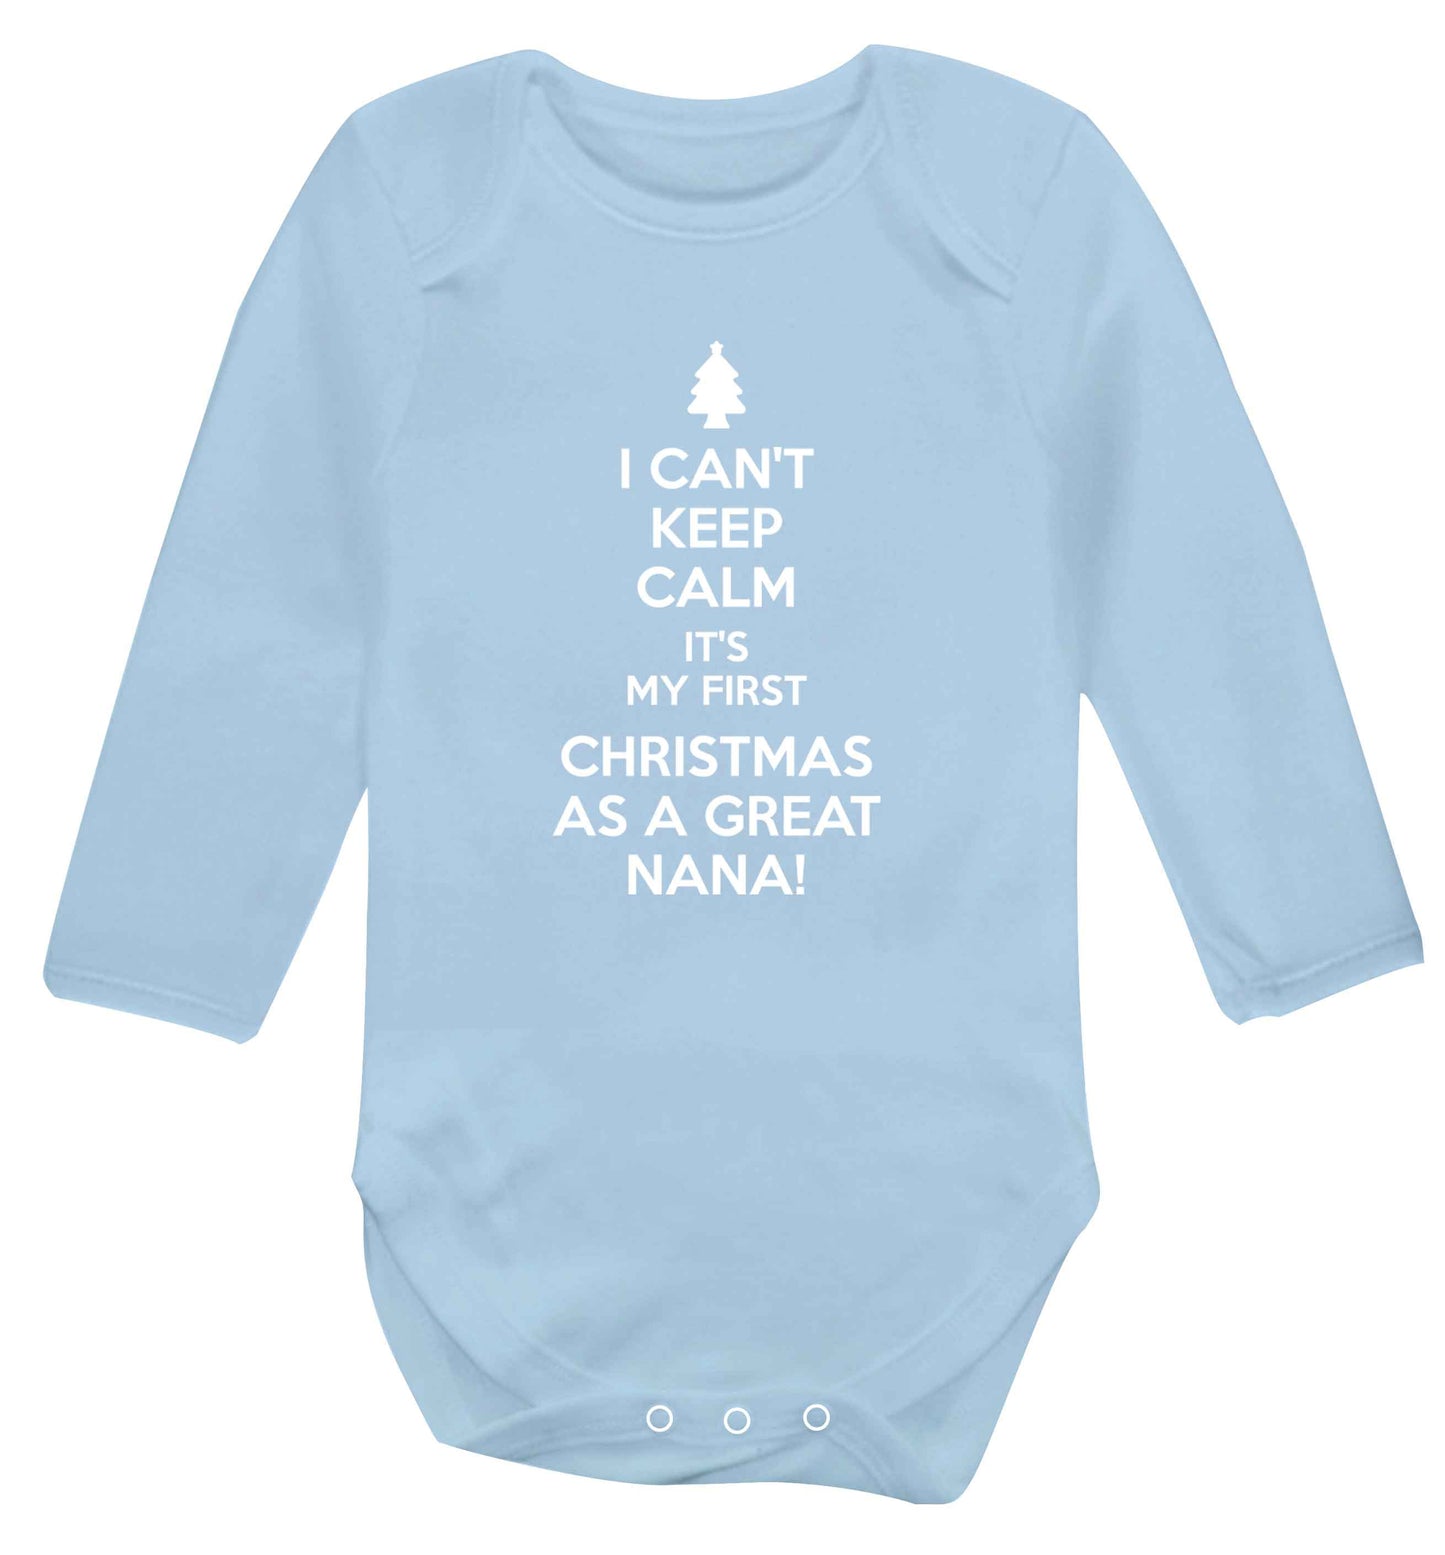 I can't keep calm it's my first Christmas as a great nana! Baby Vest long sleeved pale blue 6-12 months